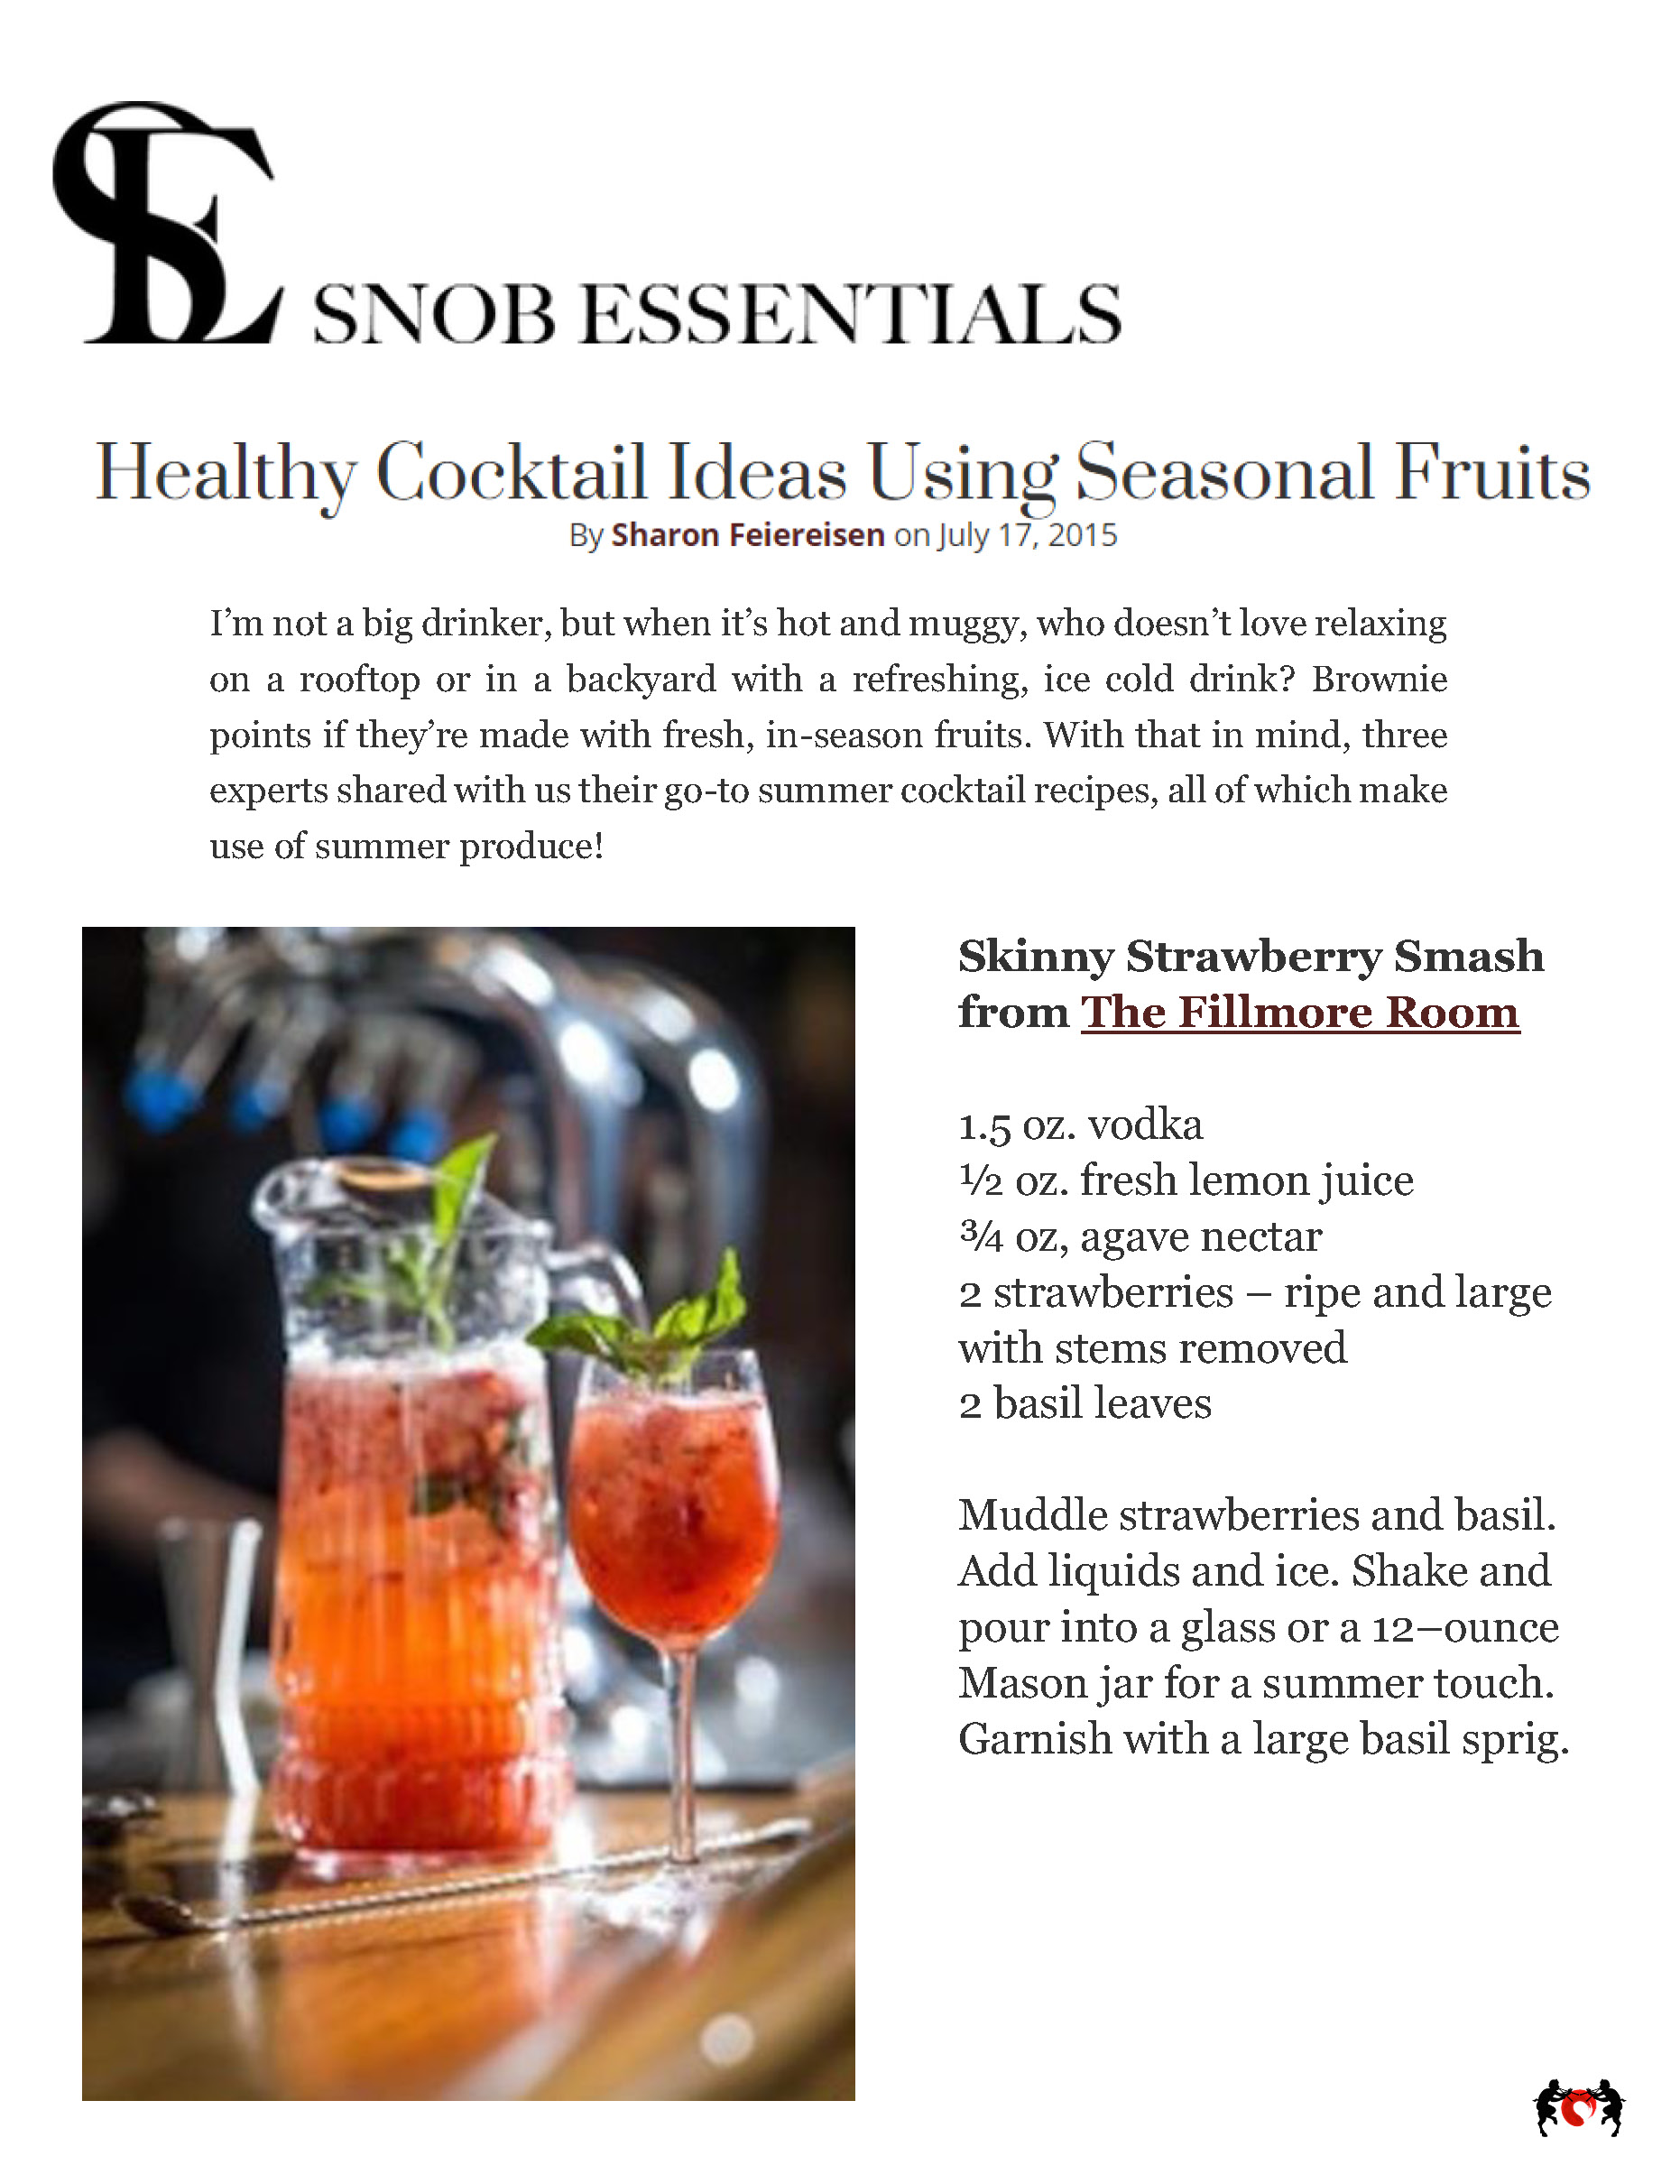 The Fillmore Room SnobEssentials.com Healthy Cocktail Ideas 7 17 15.jpg